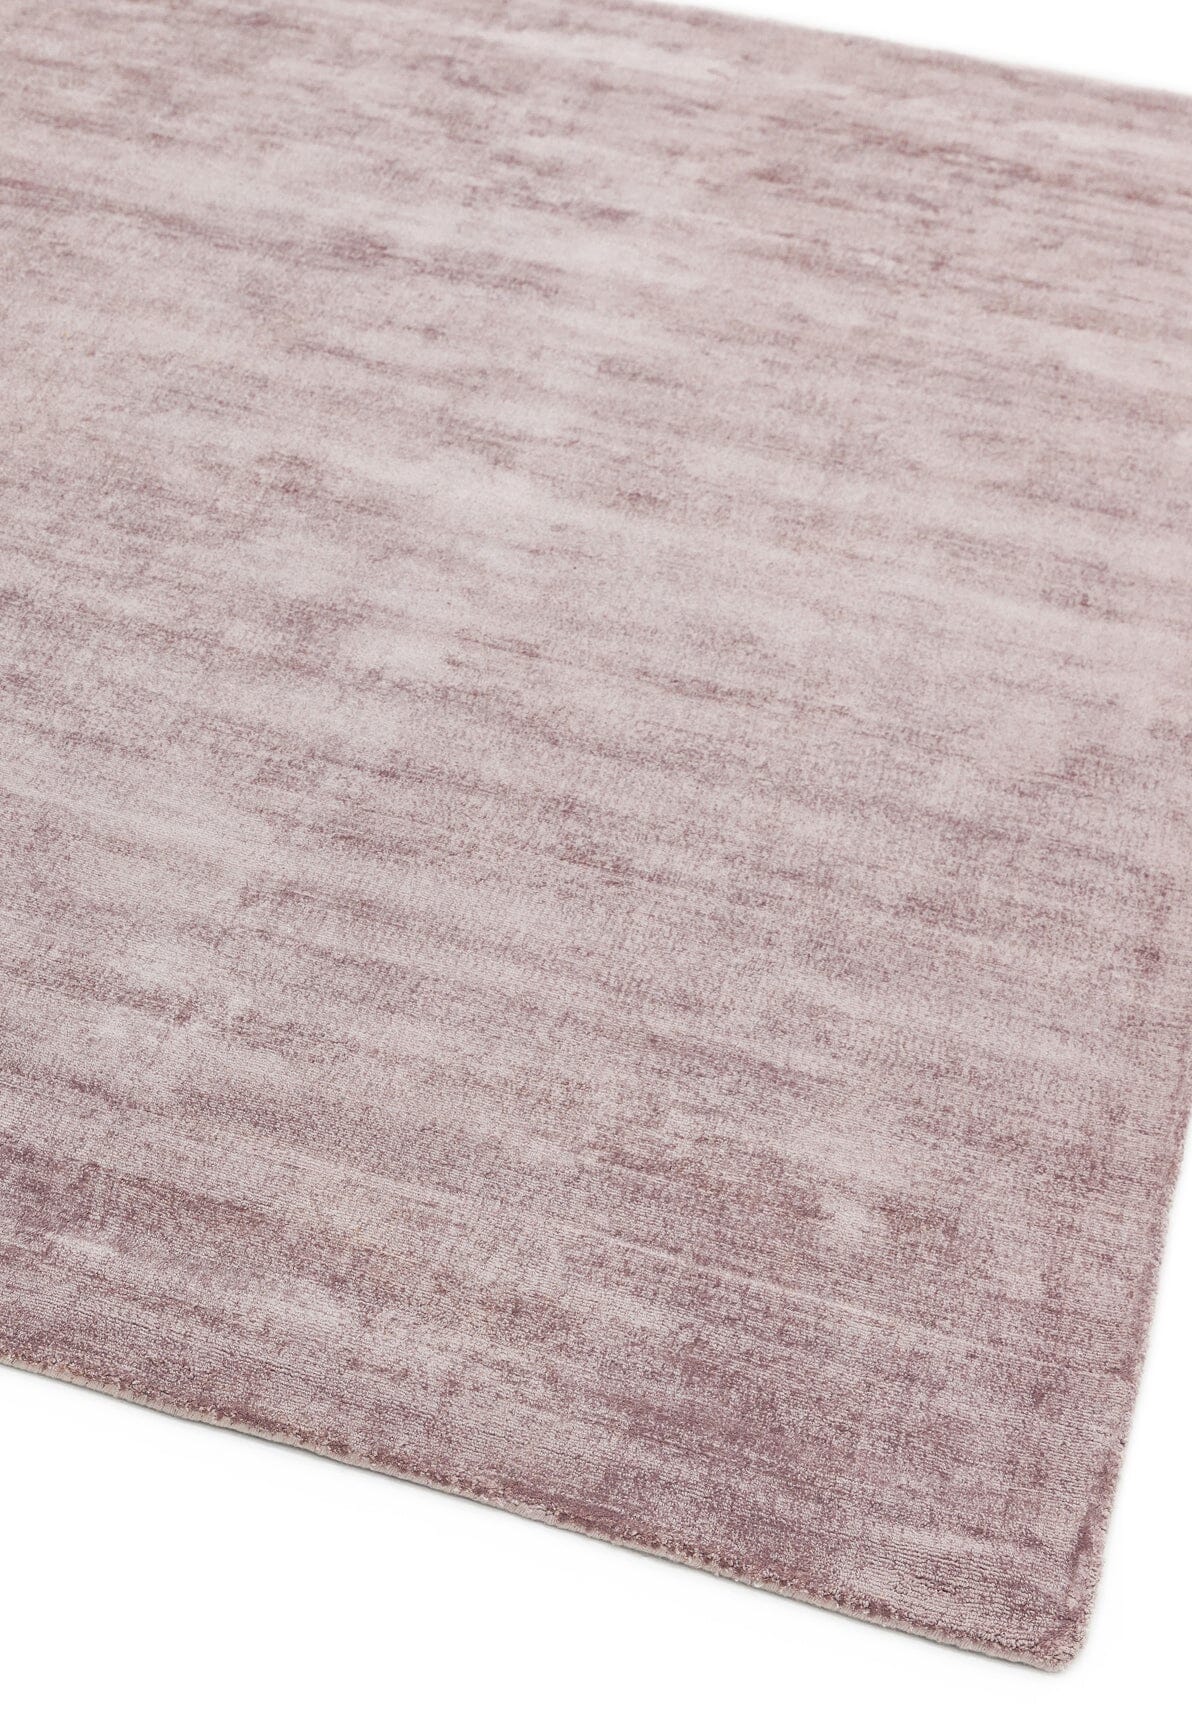  Asiatic Carpets-Asiatic Carpets Blade Hand Woven Runner Heather - 66 x 240cm-Purple 349 